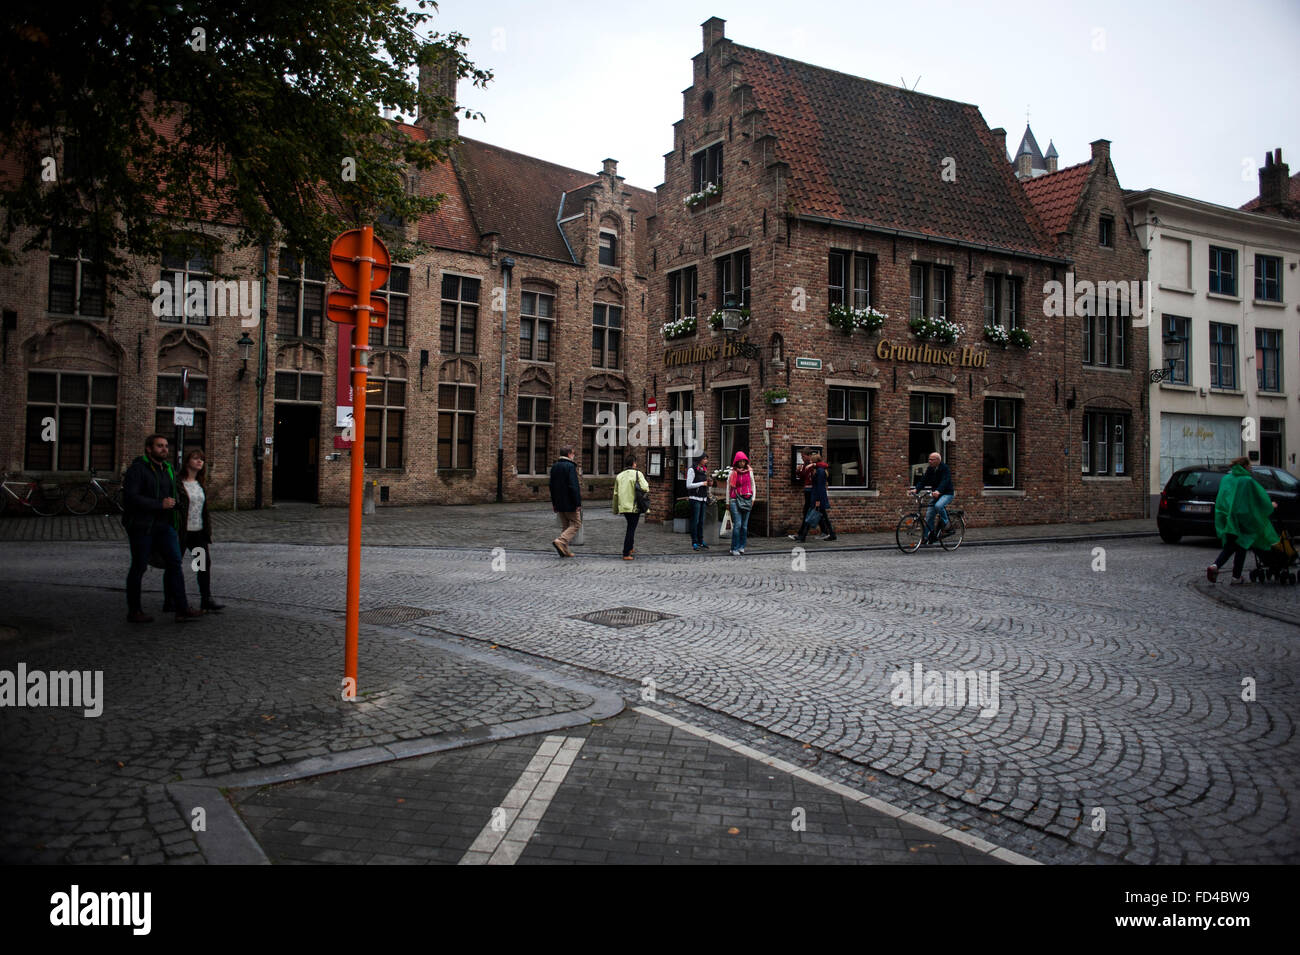 Typical buildings in the historic town of Bruges Stock Photo